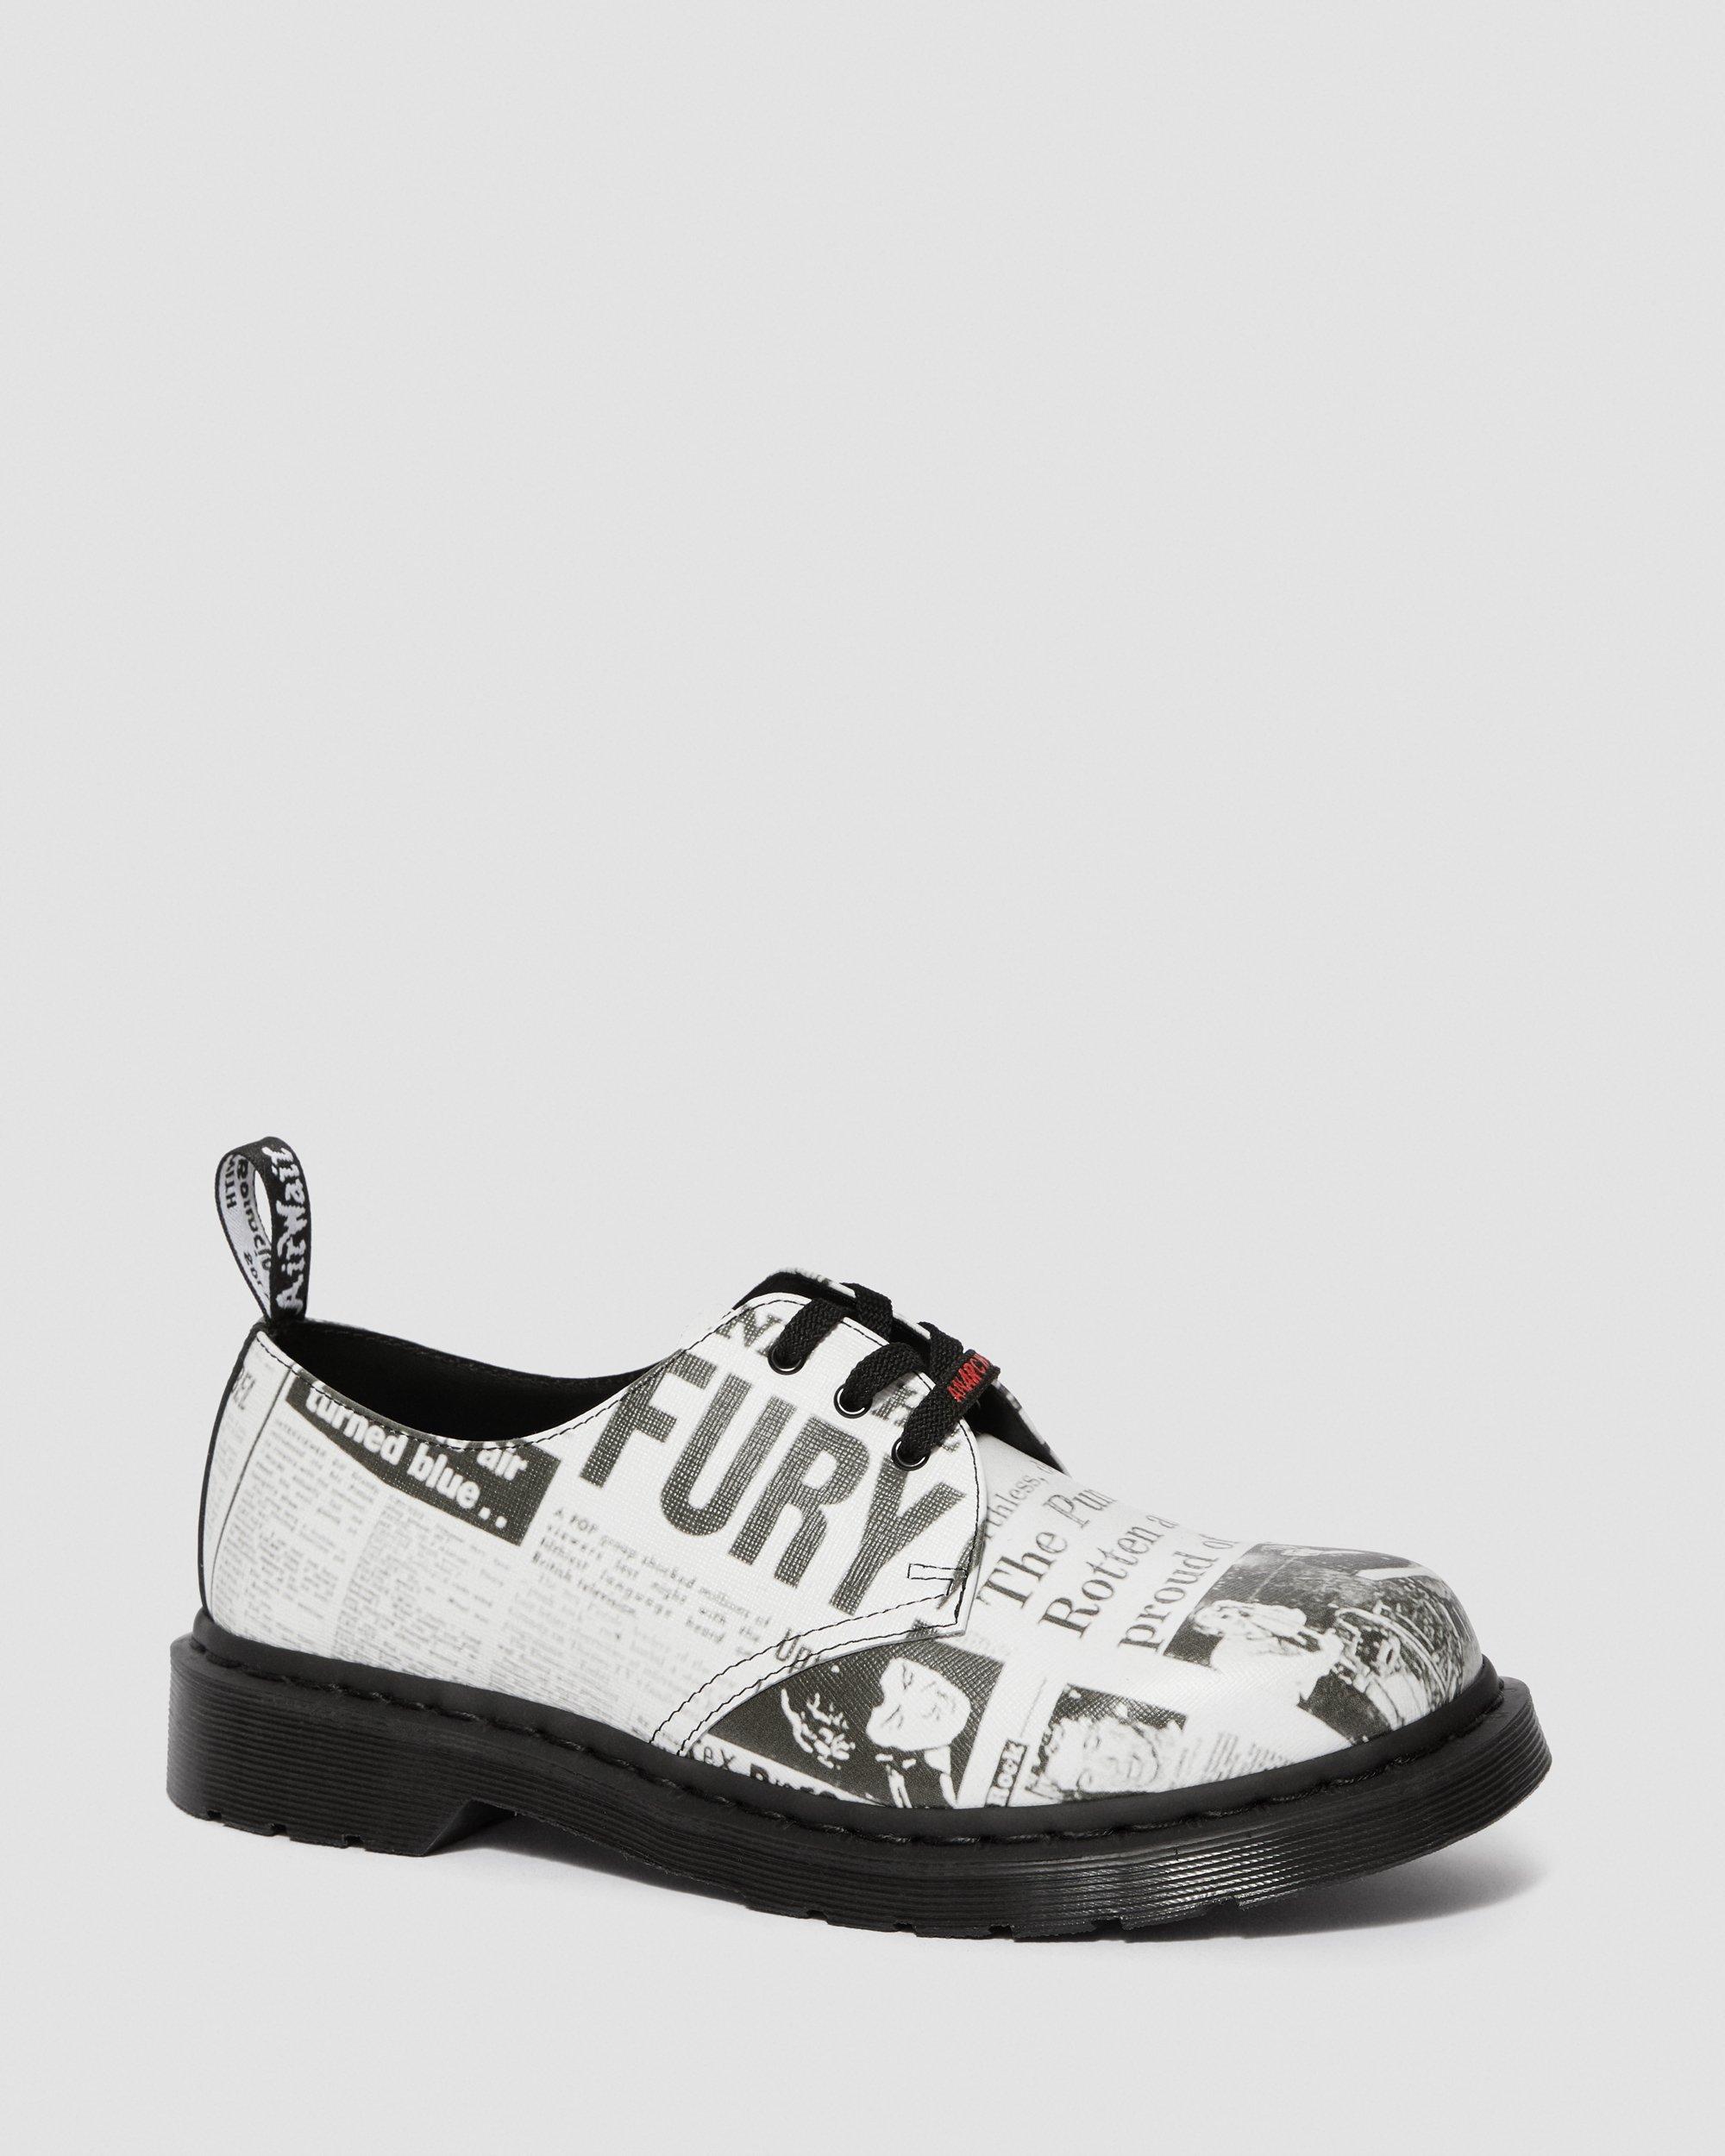 DR MARTENS 1461 Sex Pistols Leather Printed Oxford Shoes